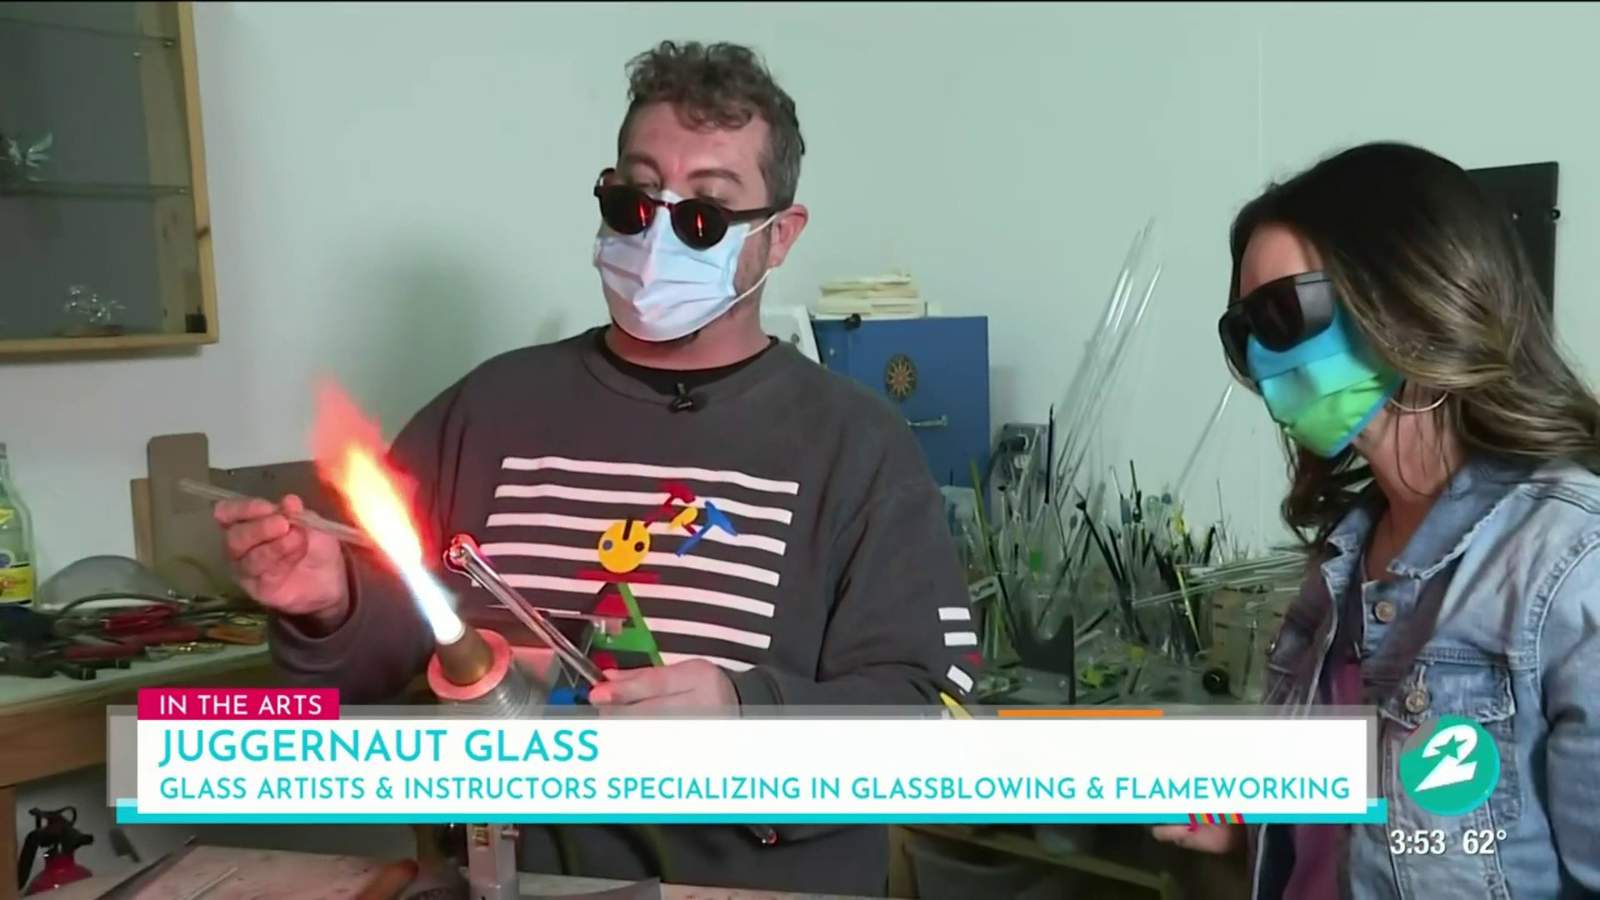 Learn the artistic technique of glass blowing at Juggernaut Glass in the Heights